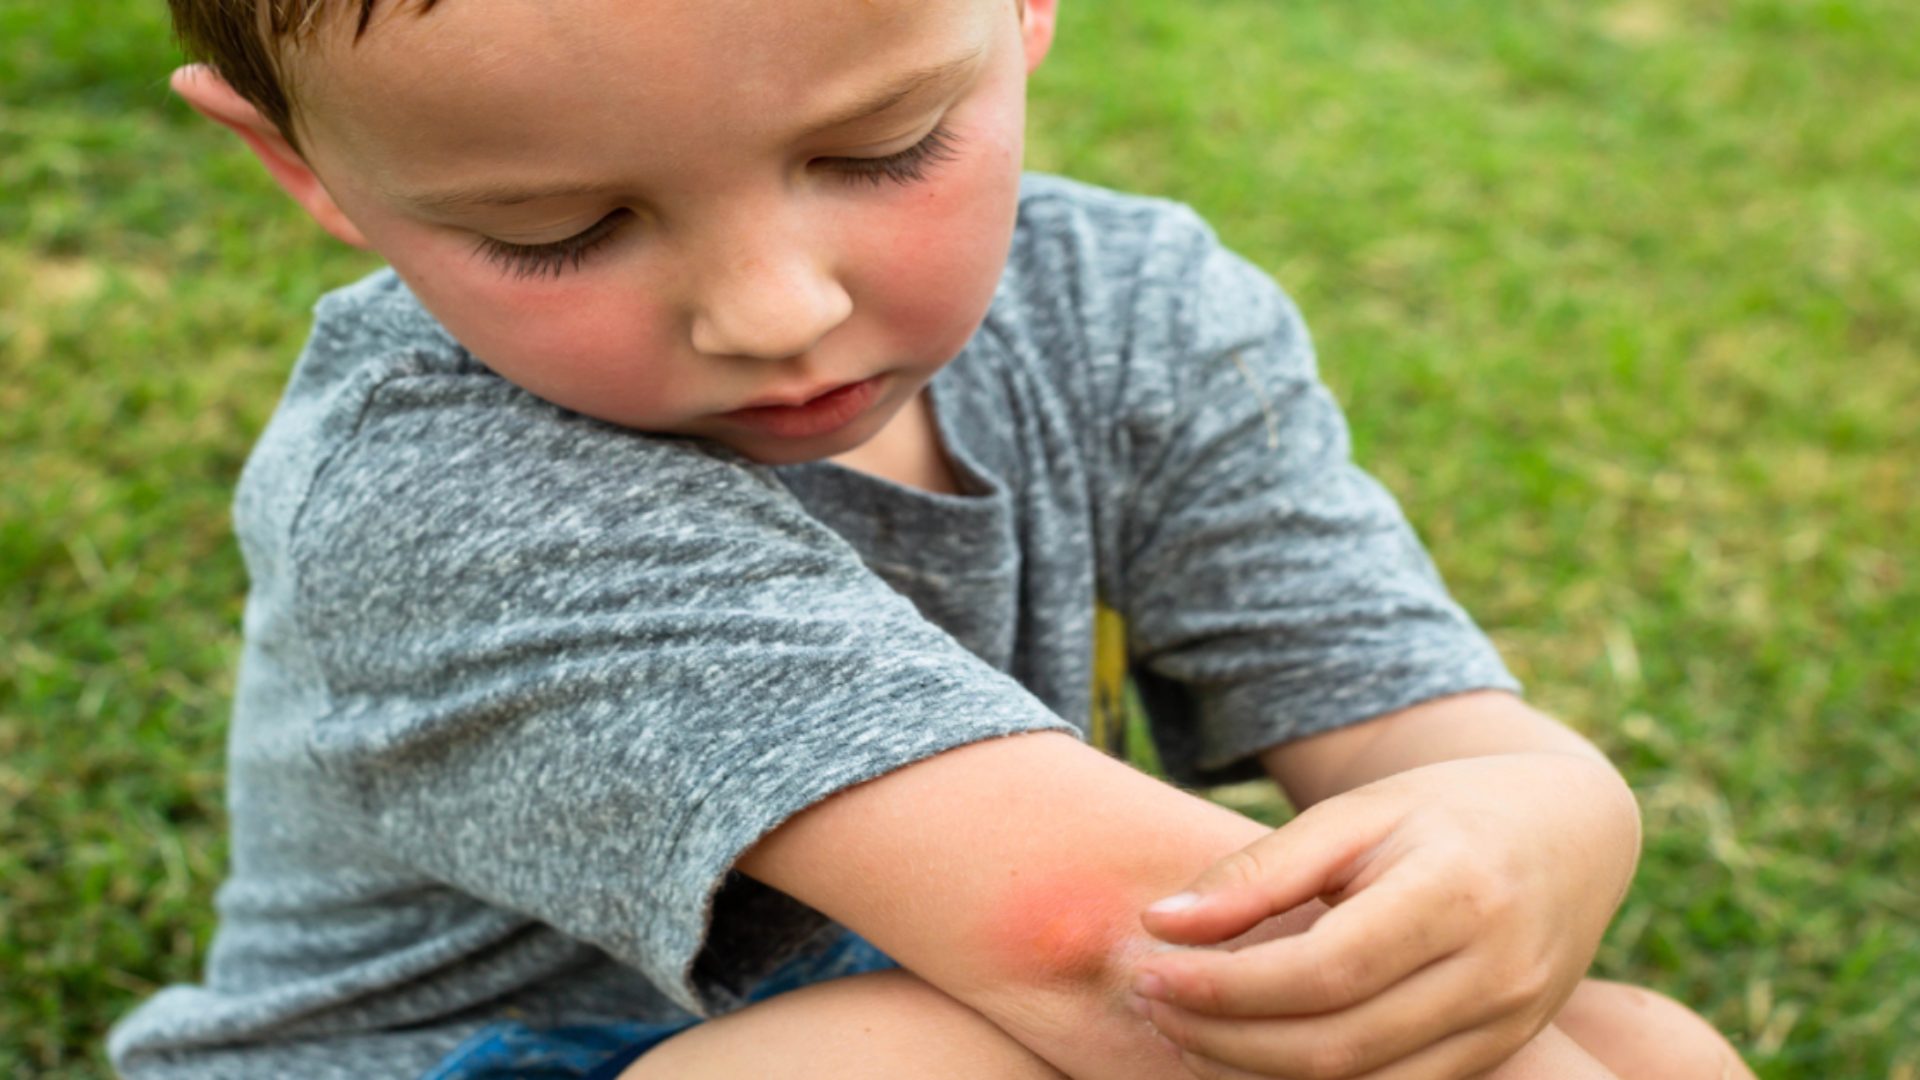 Dealing with Insect Bites and Stings